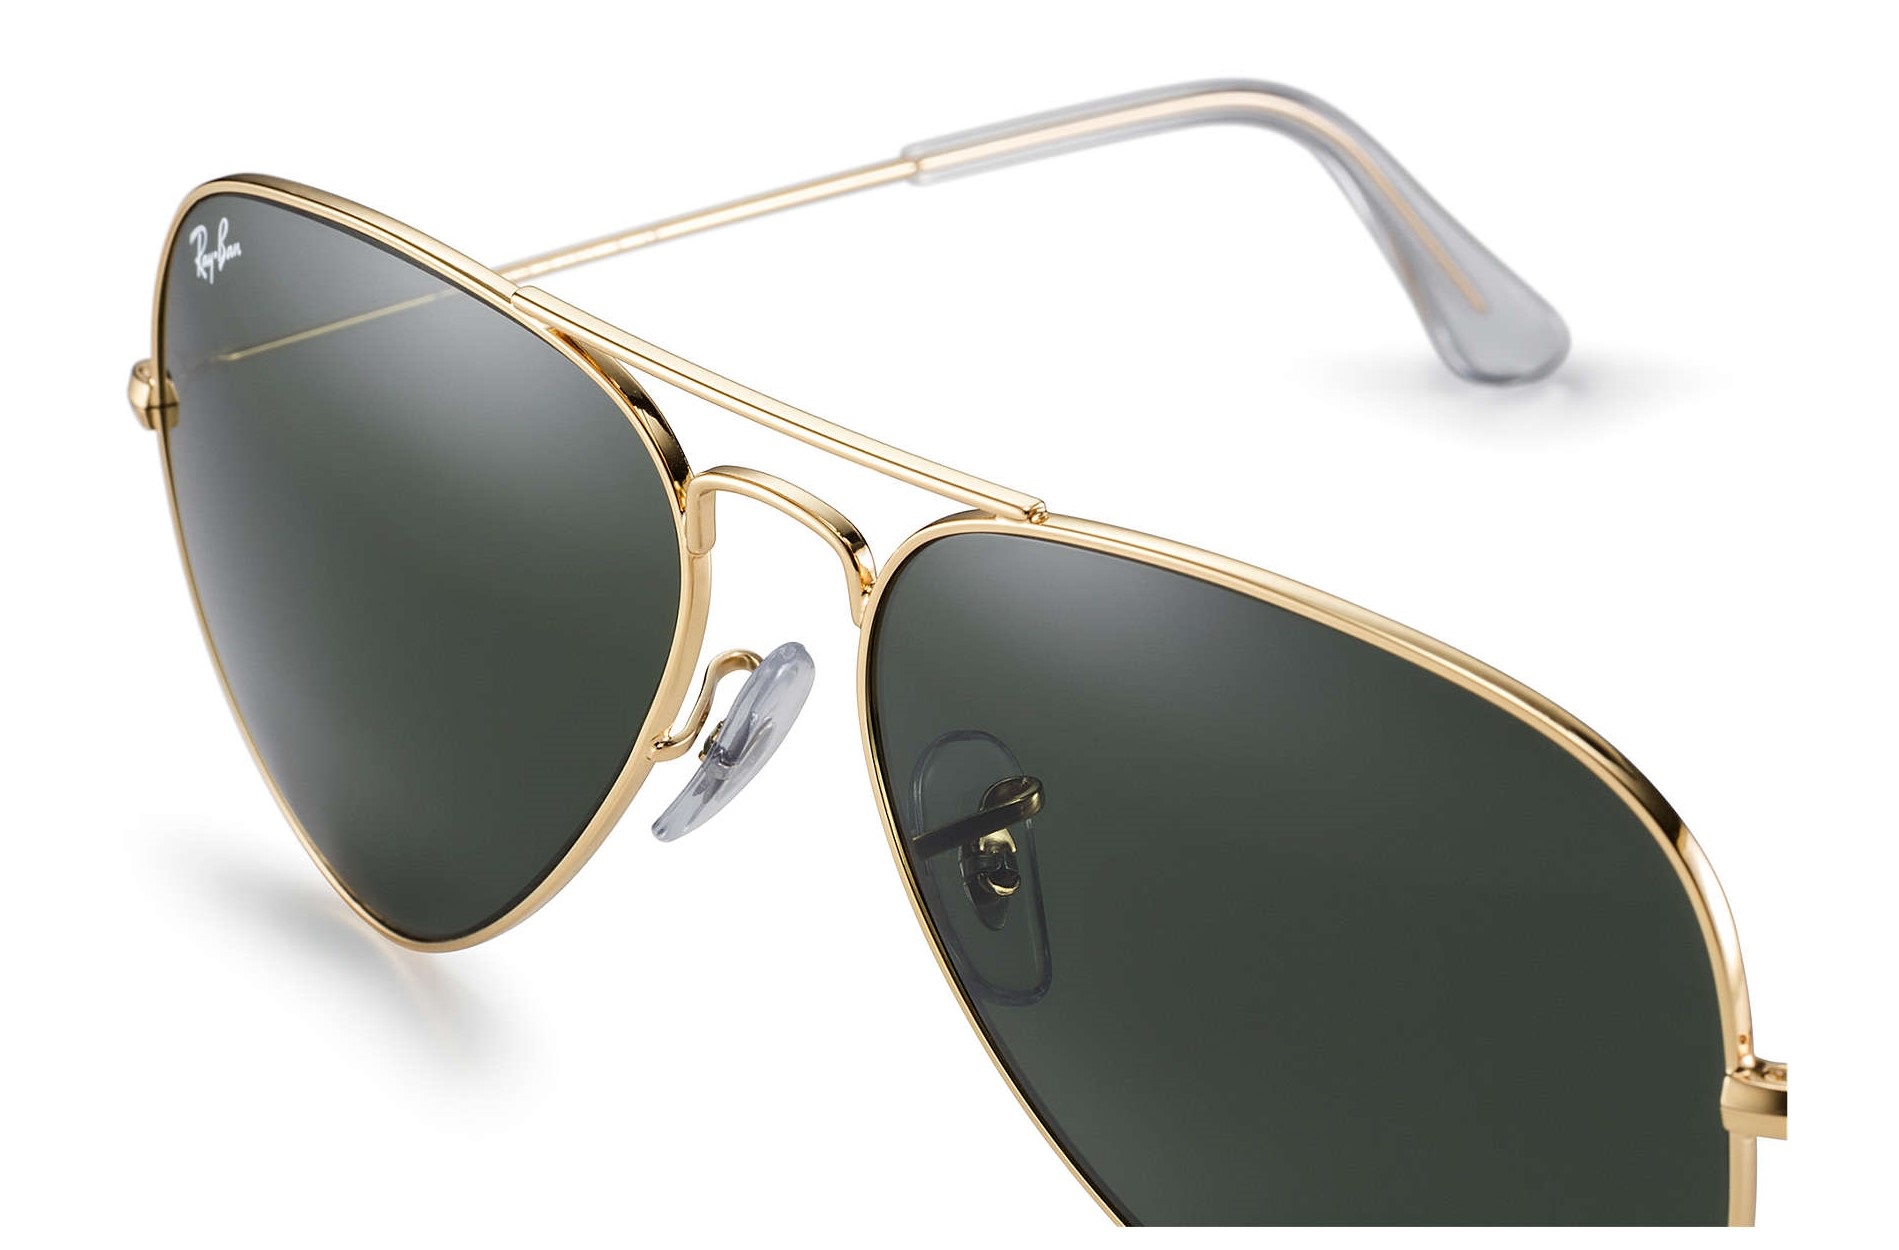 Ray-Ban Aviator Size Guide | SportRx 